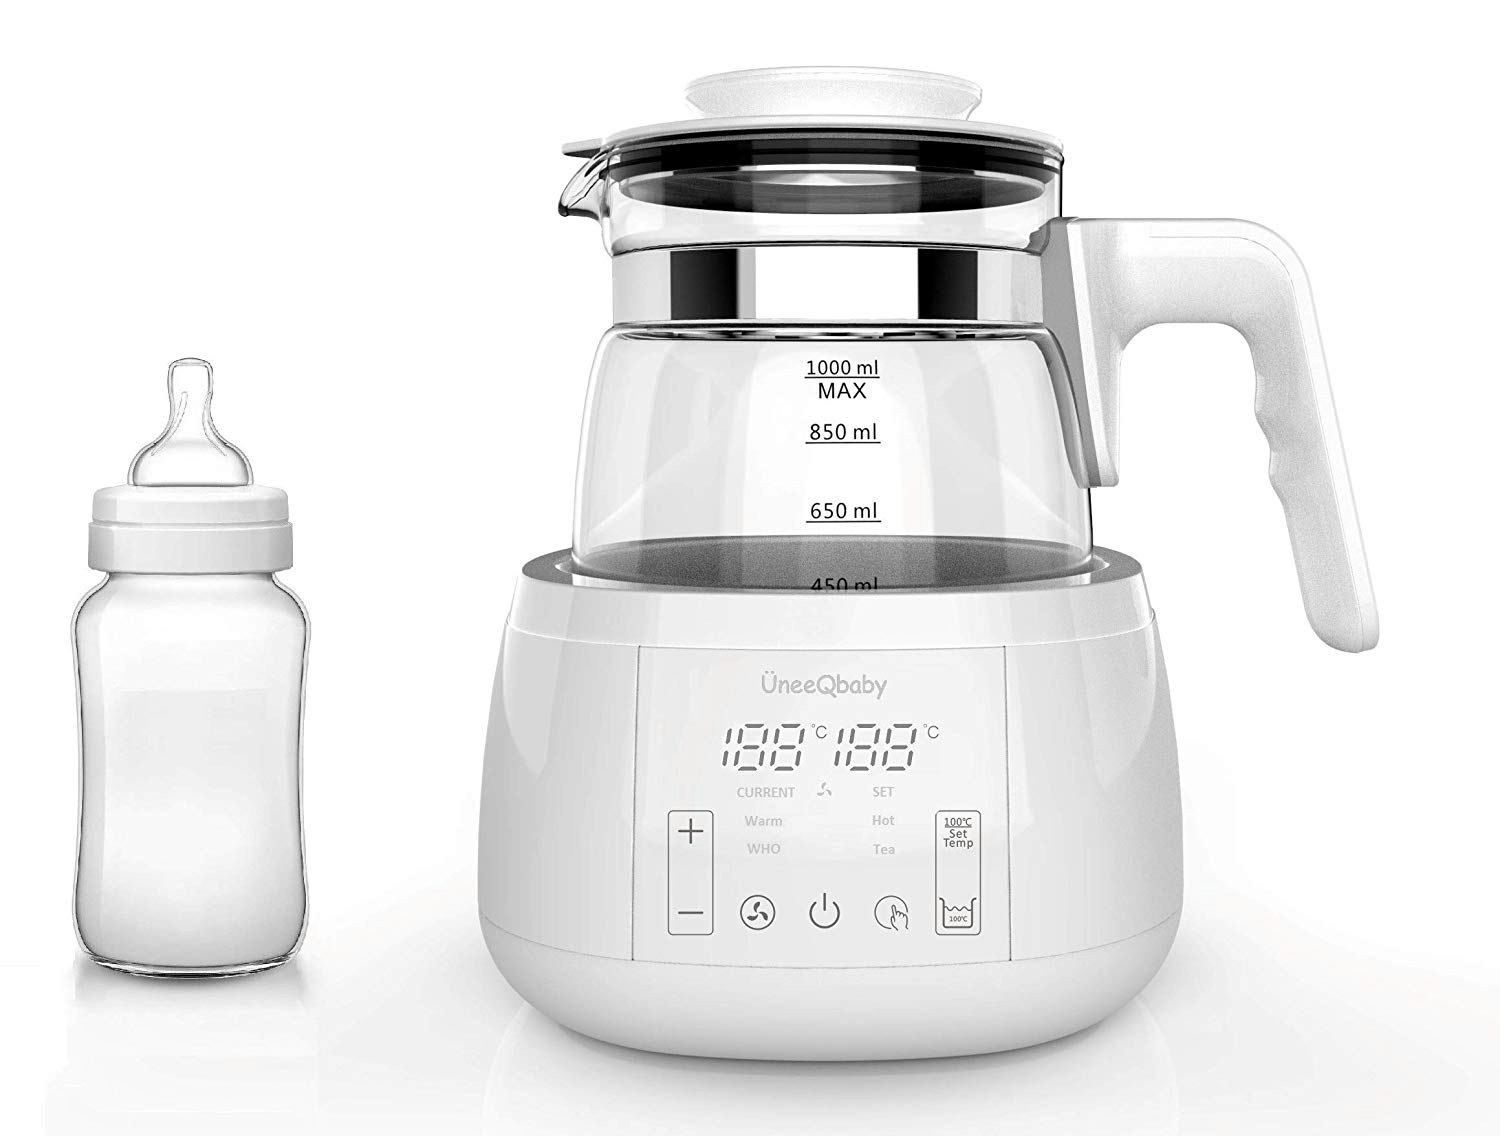 Baby Appliances Supplier, Electric Kettle for Baby Formula For Sale